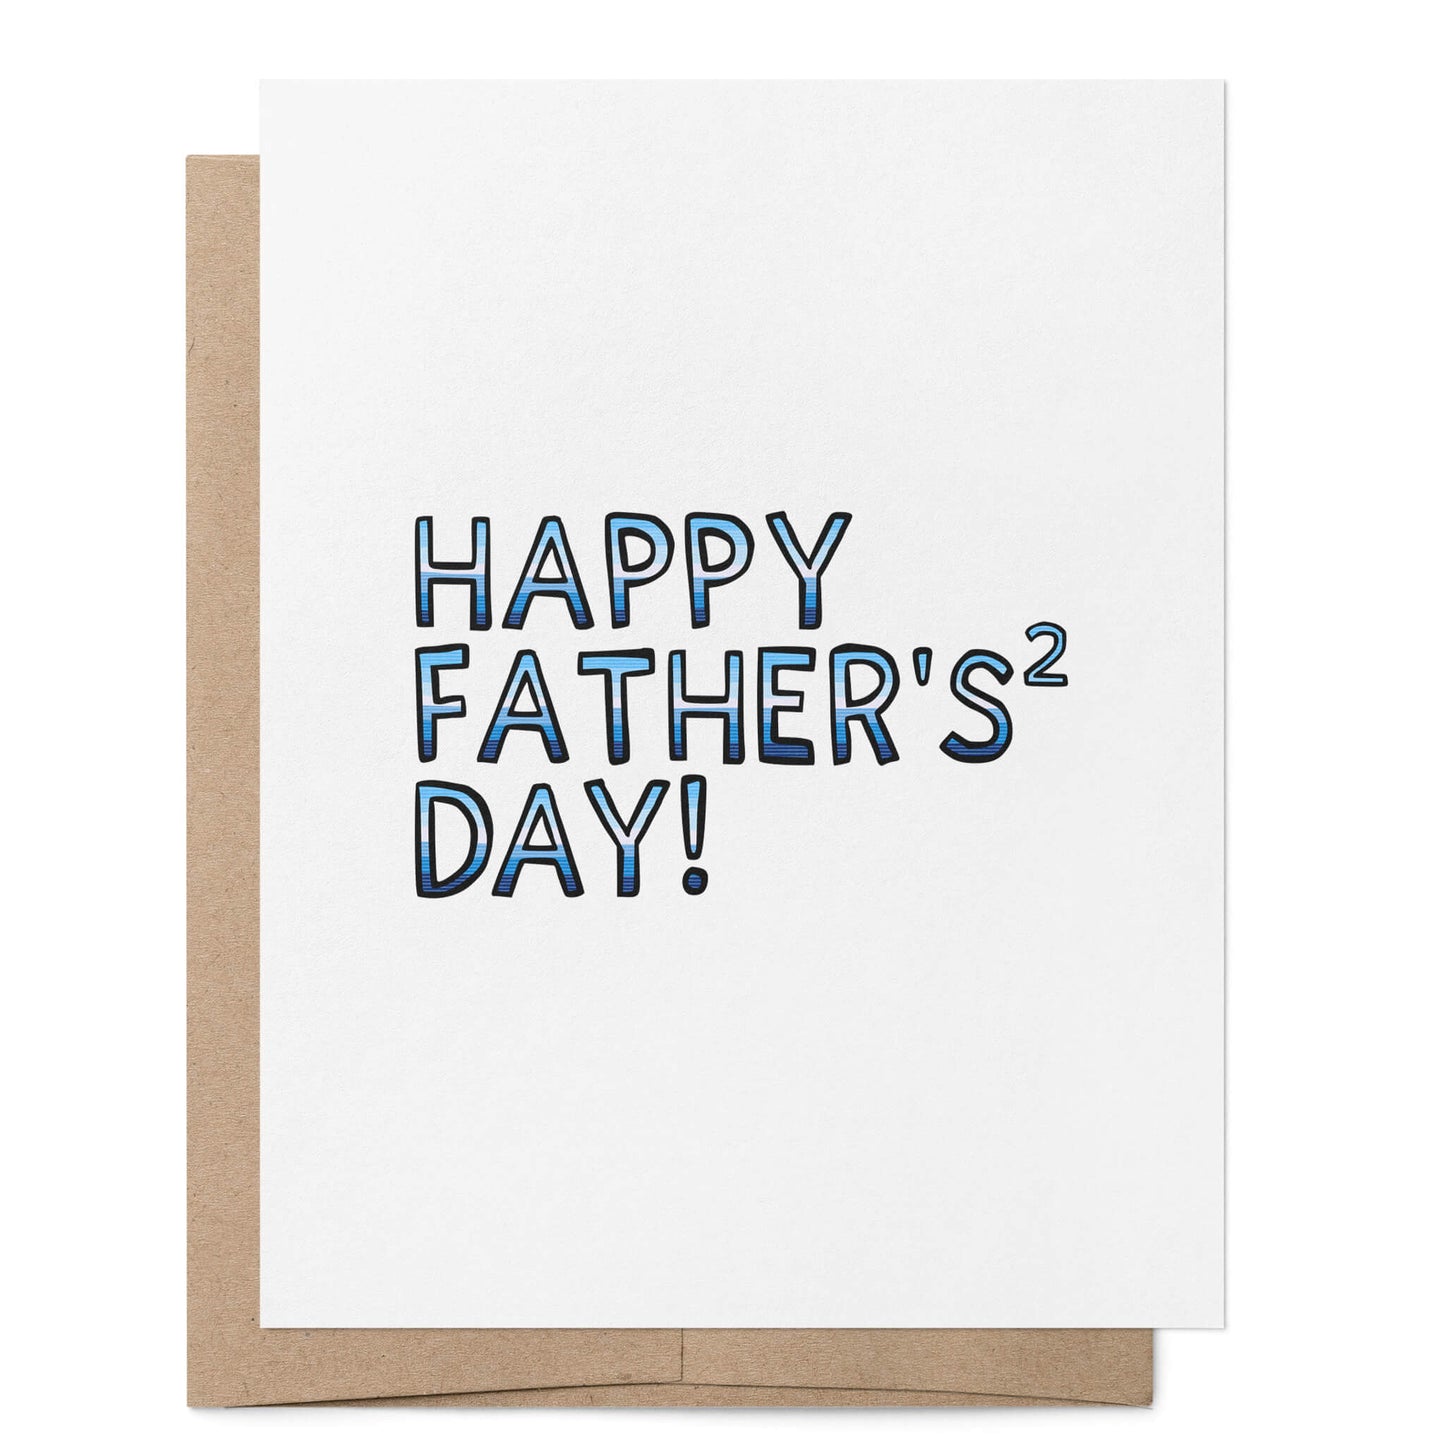 Happy Father's (squared) Day Card